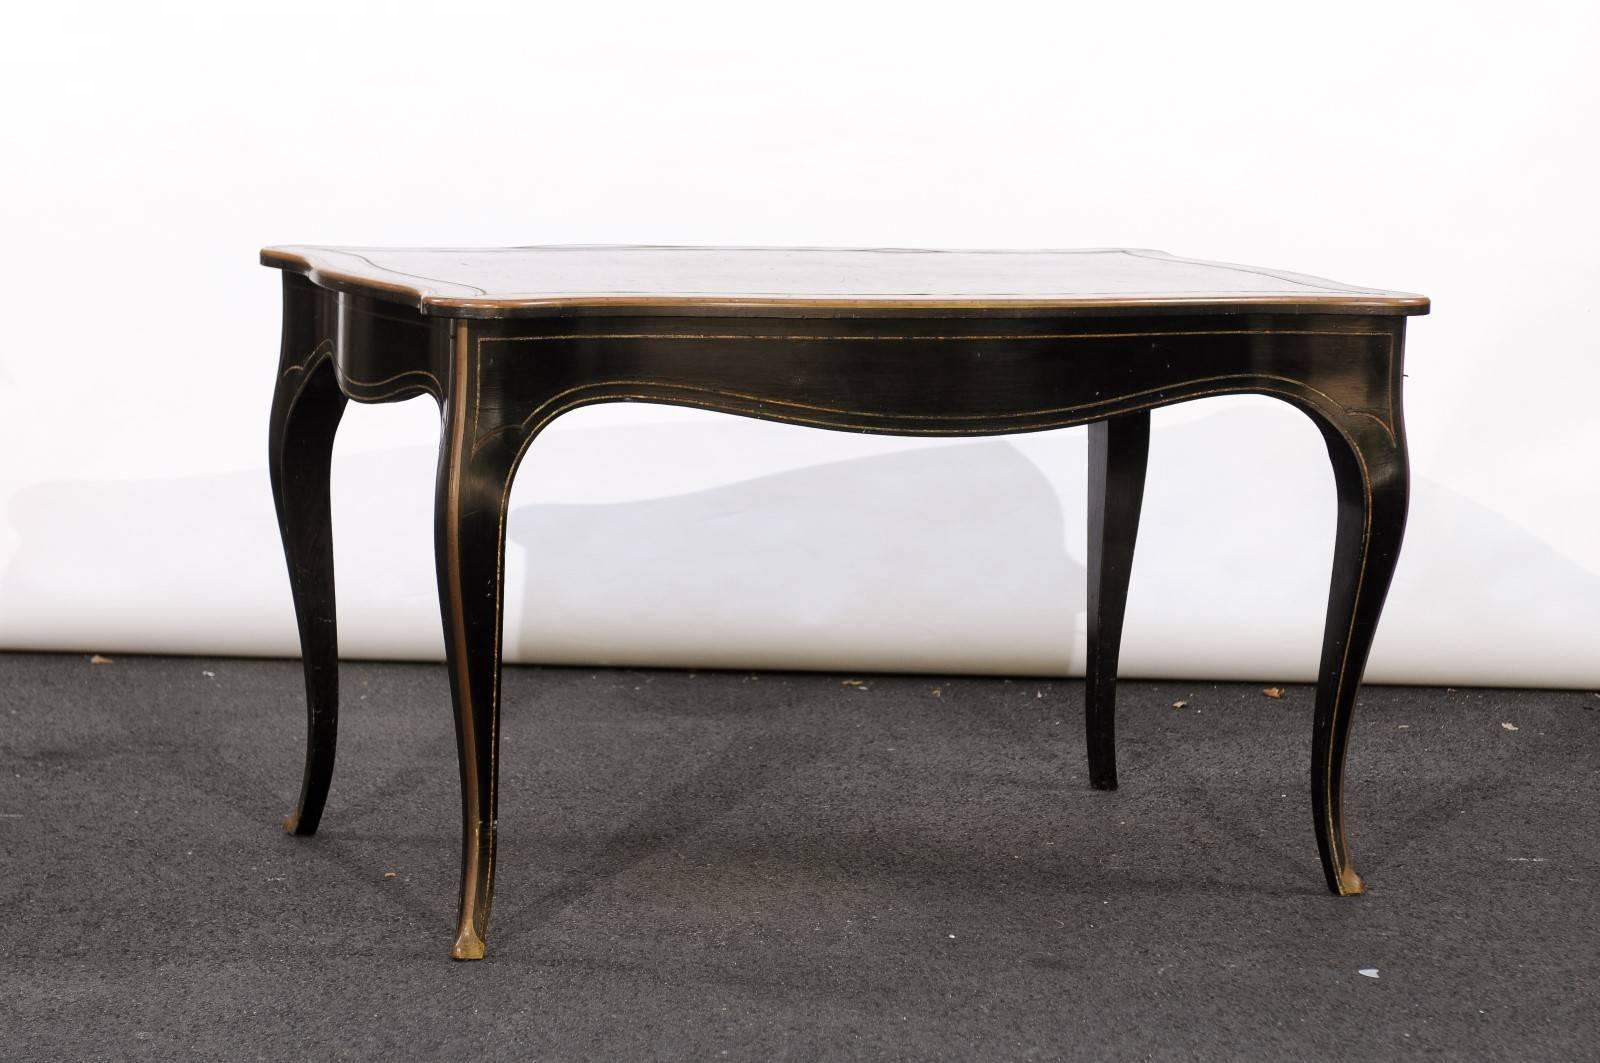 This French Napoleon III style ebonized wood writing table features a sinuous top with gilded accents in the border over four cabriole legs. Something tells us we will be fighting over this table! In the style of Napoleon III, this piece can work as